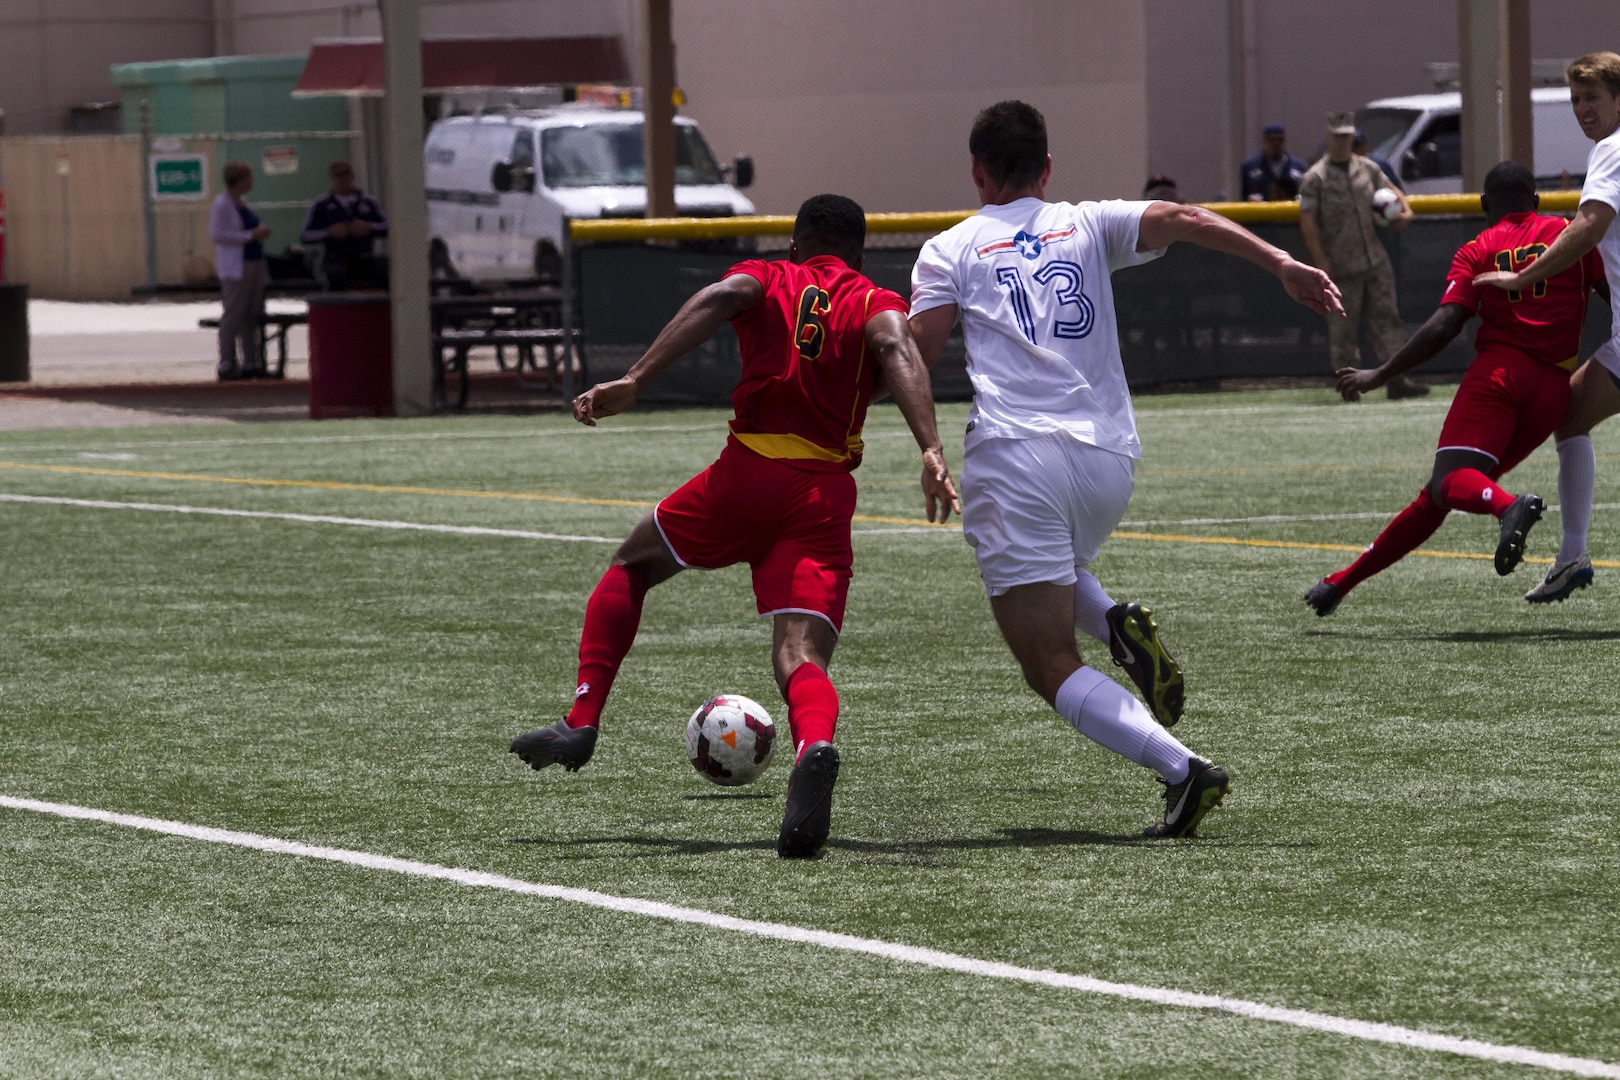 Members of the All-Marine and the Air Force soccer teams fight for the ball May 18 during a 2015 Armed Forces Soccer Championship game at Marine Corps Air Station Miramar, Calif. Representatives from each military branch participated in the championship.